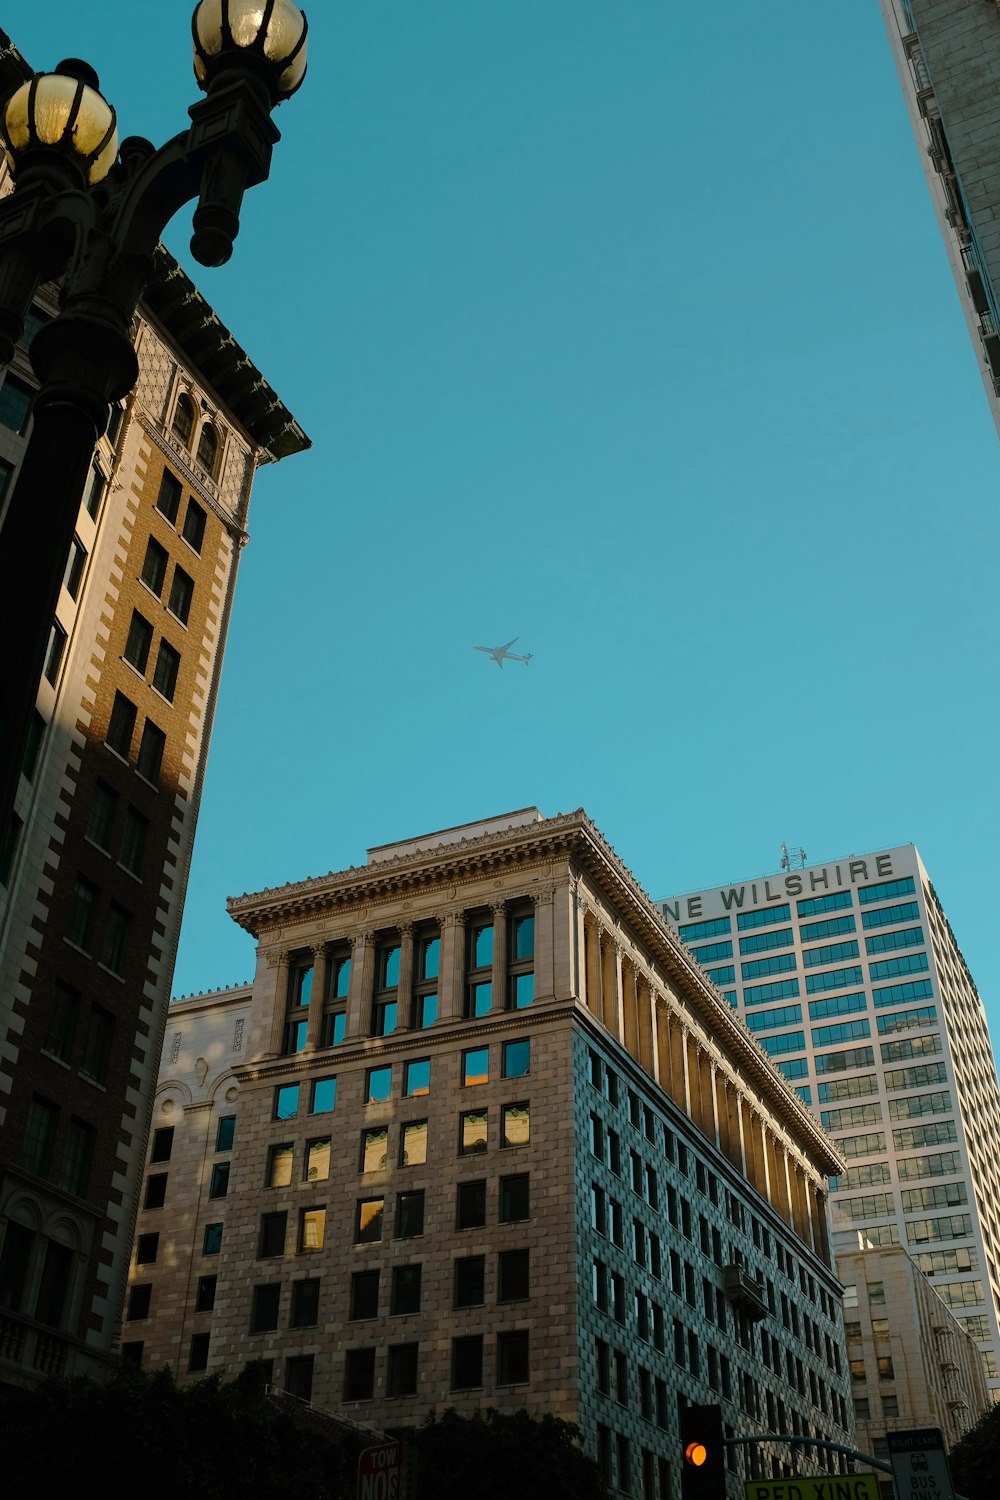 a plane flying in the sky over some buildings